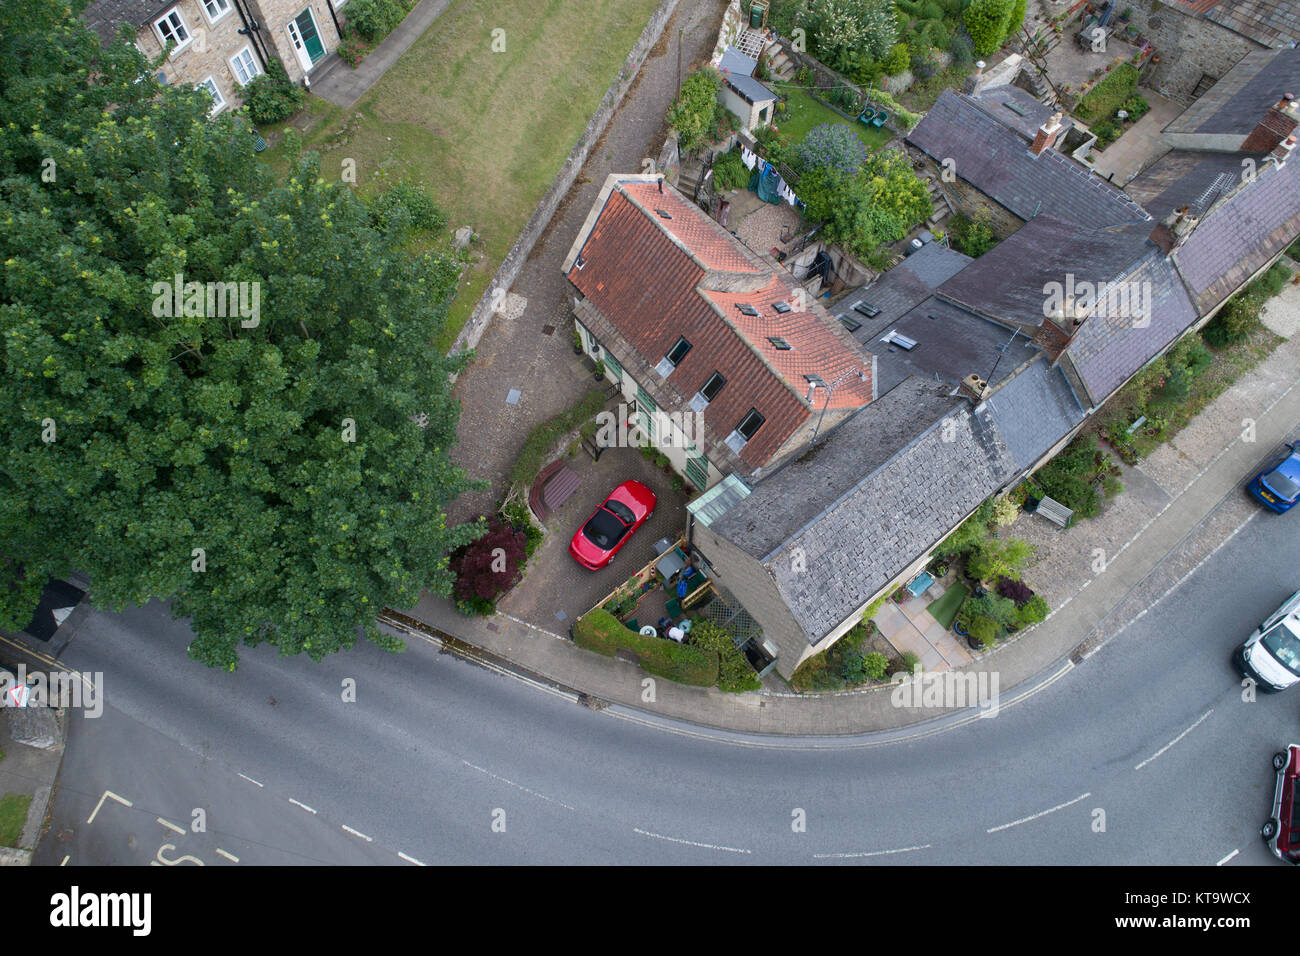 Overview of shiny red car standing in driveway of historic home, of Richmond, Yorkshire, England Stock Photo